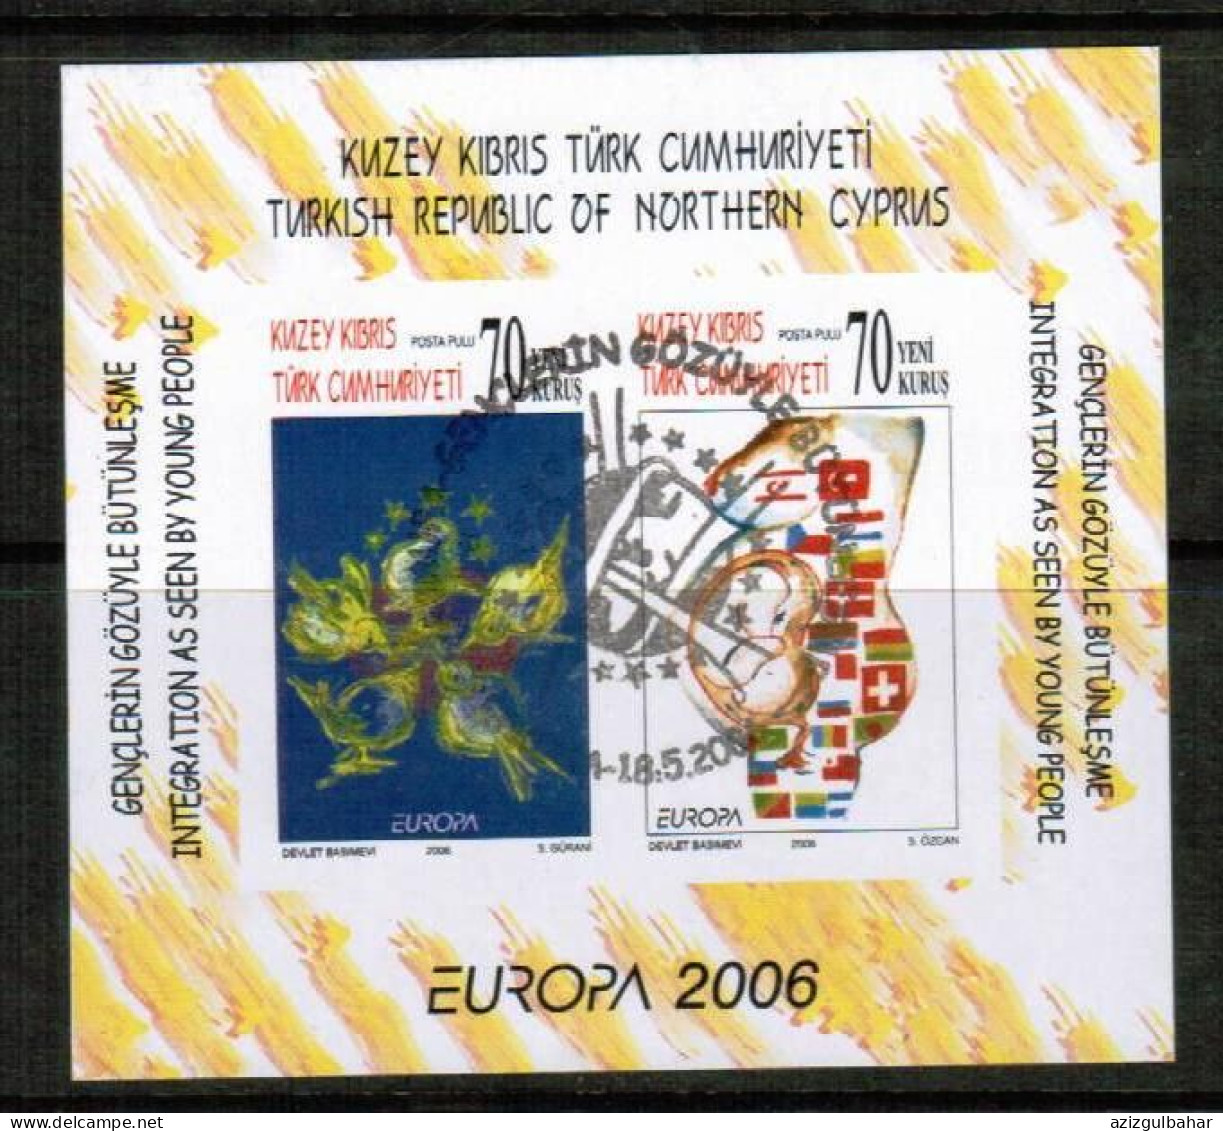 2006 - EUROPA  - INTEGRATION AS SEEN BY YOUR PEOPLE -  TURKISH CYPRIOT STAMPS - USED BLOCK - Usati